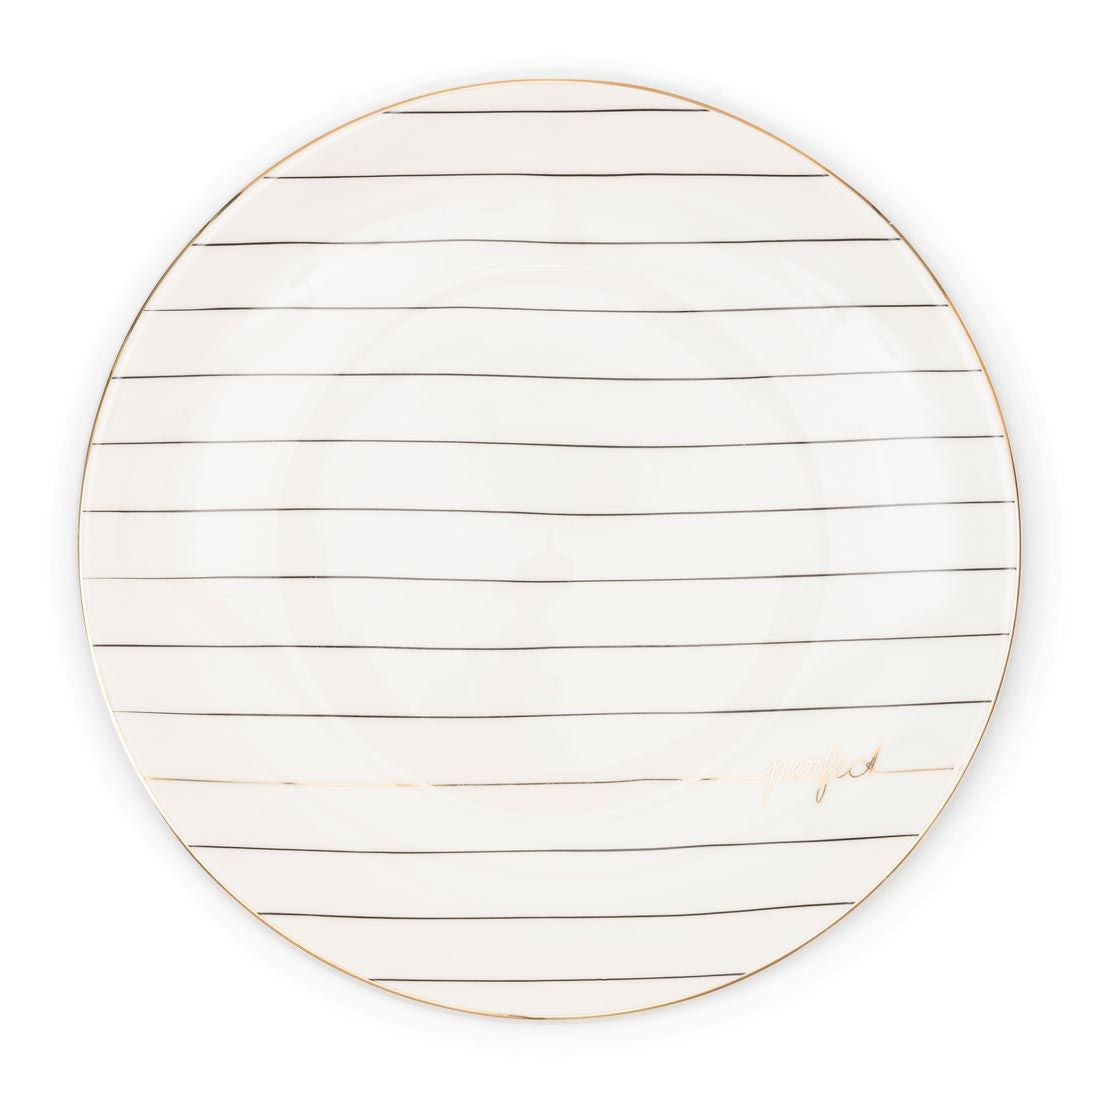 Dots & Stripes Perfect Dinner Plate